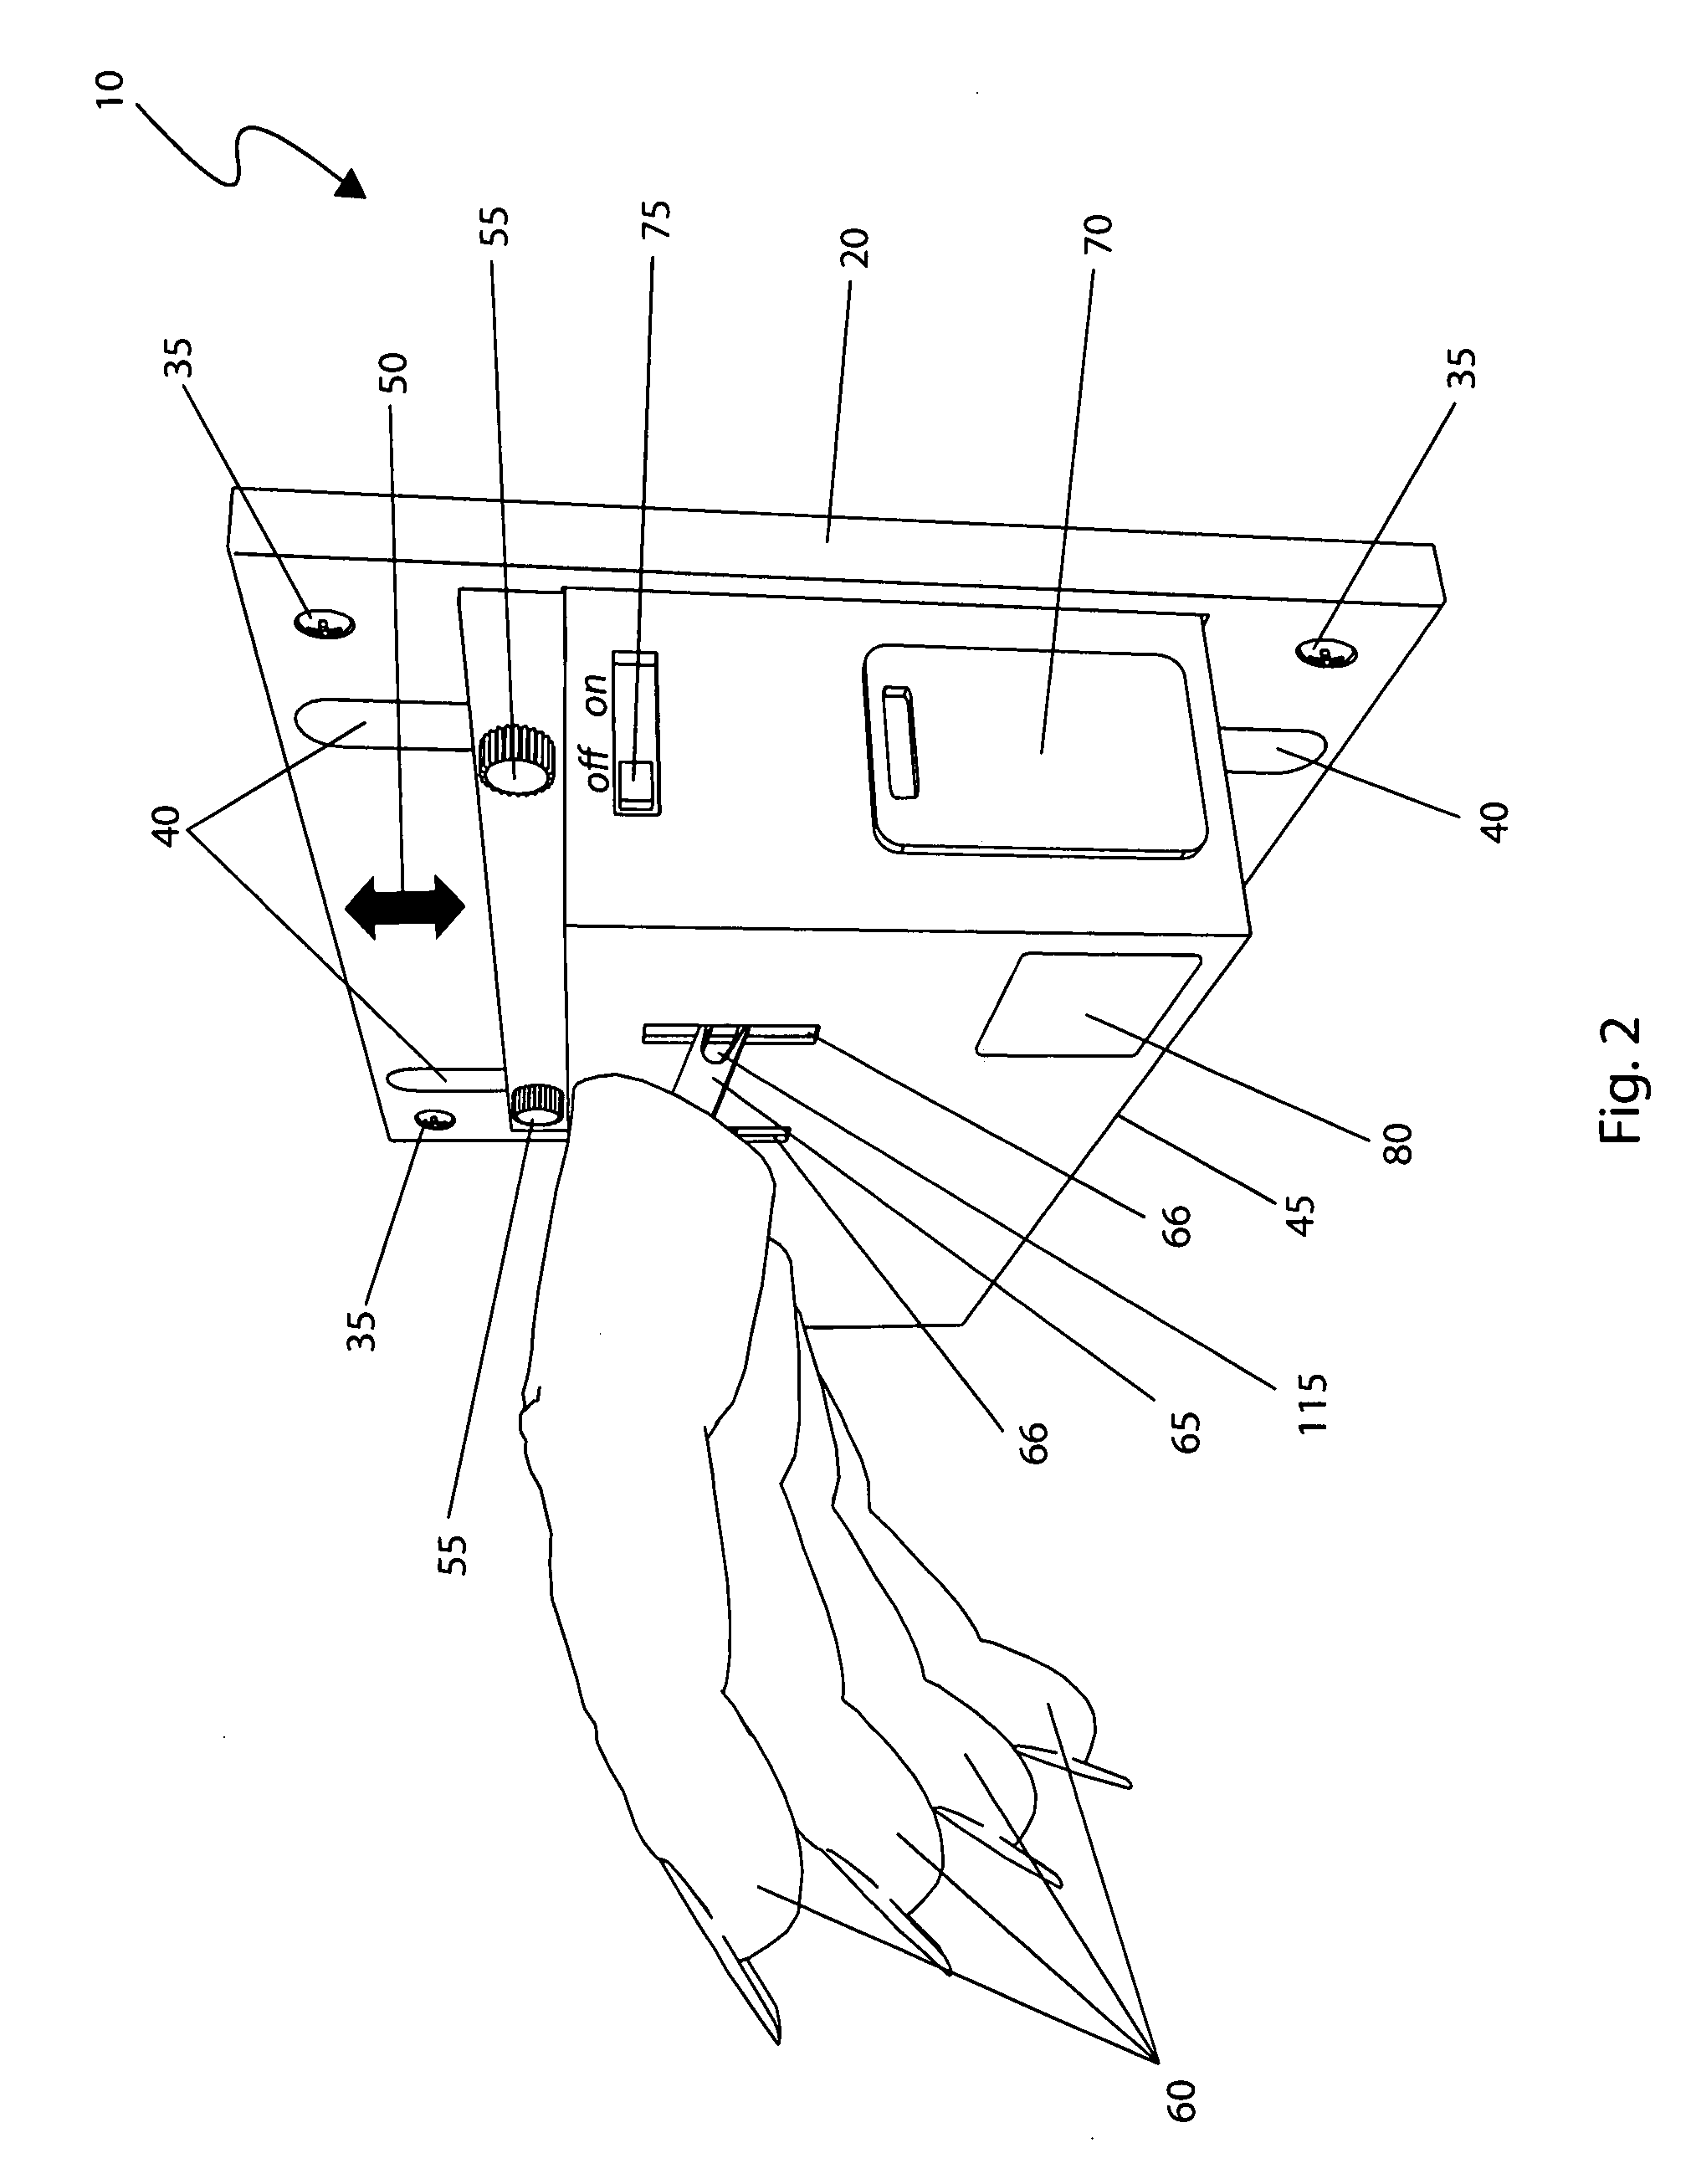 Automated pet scratching device and associated method